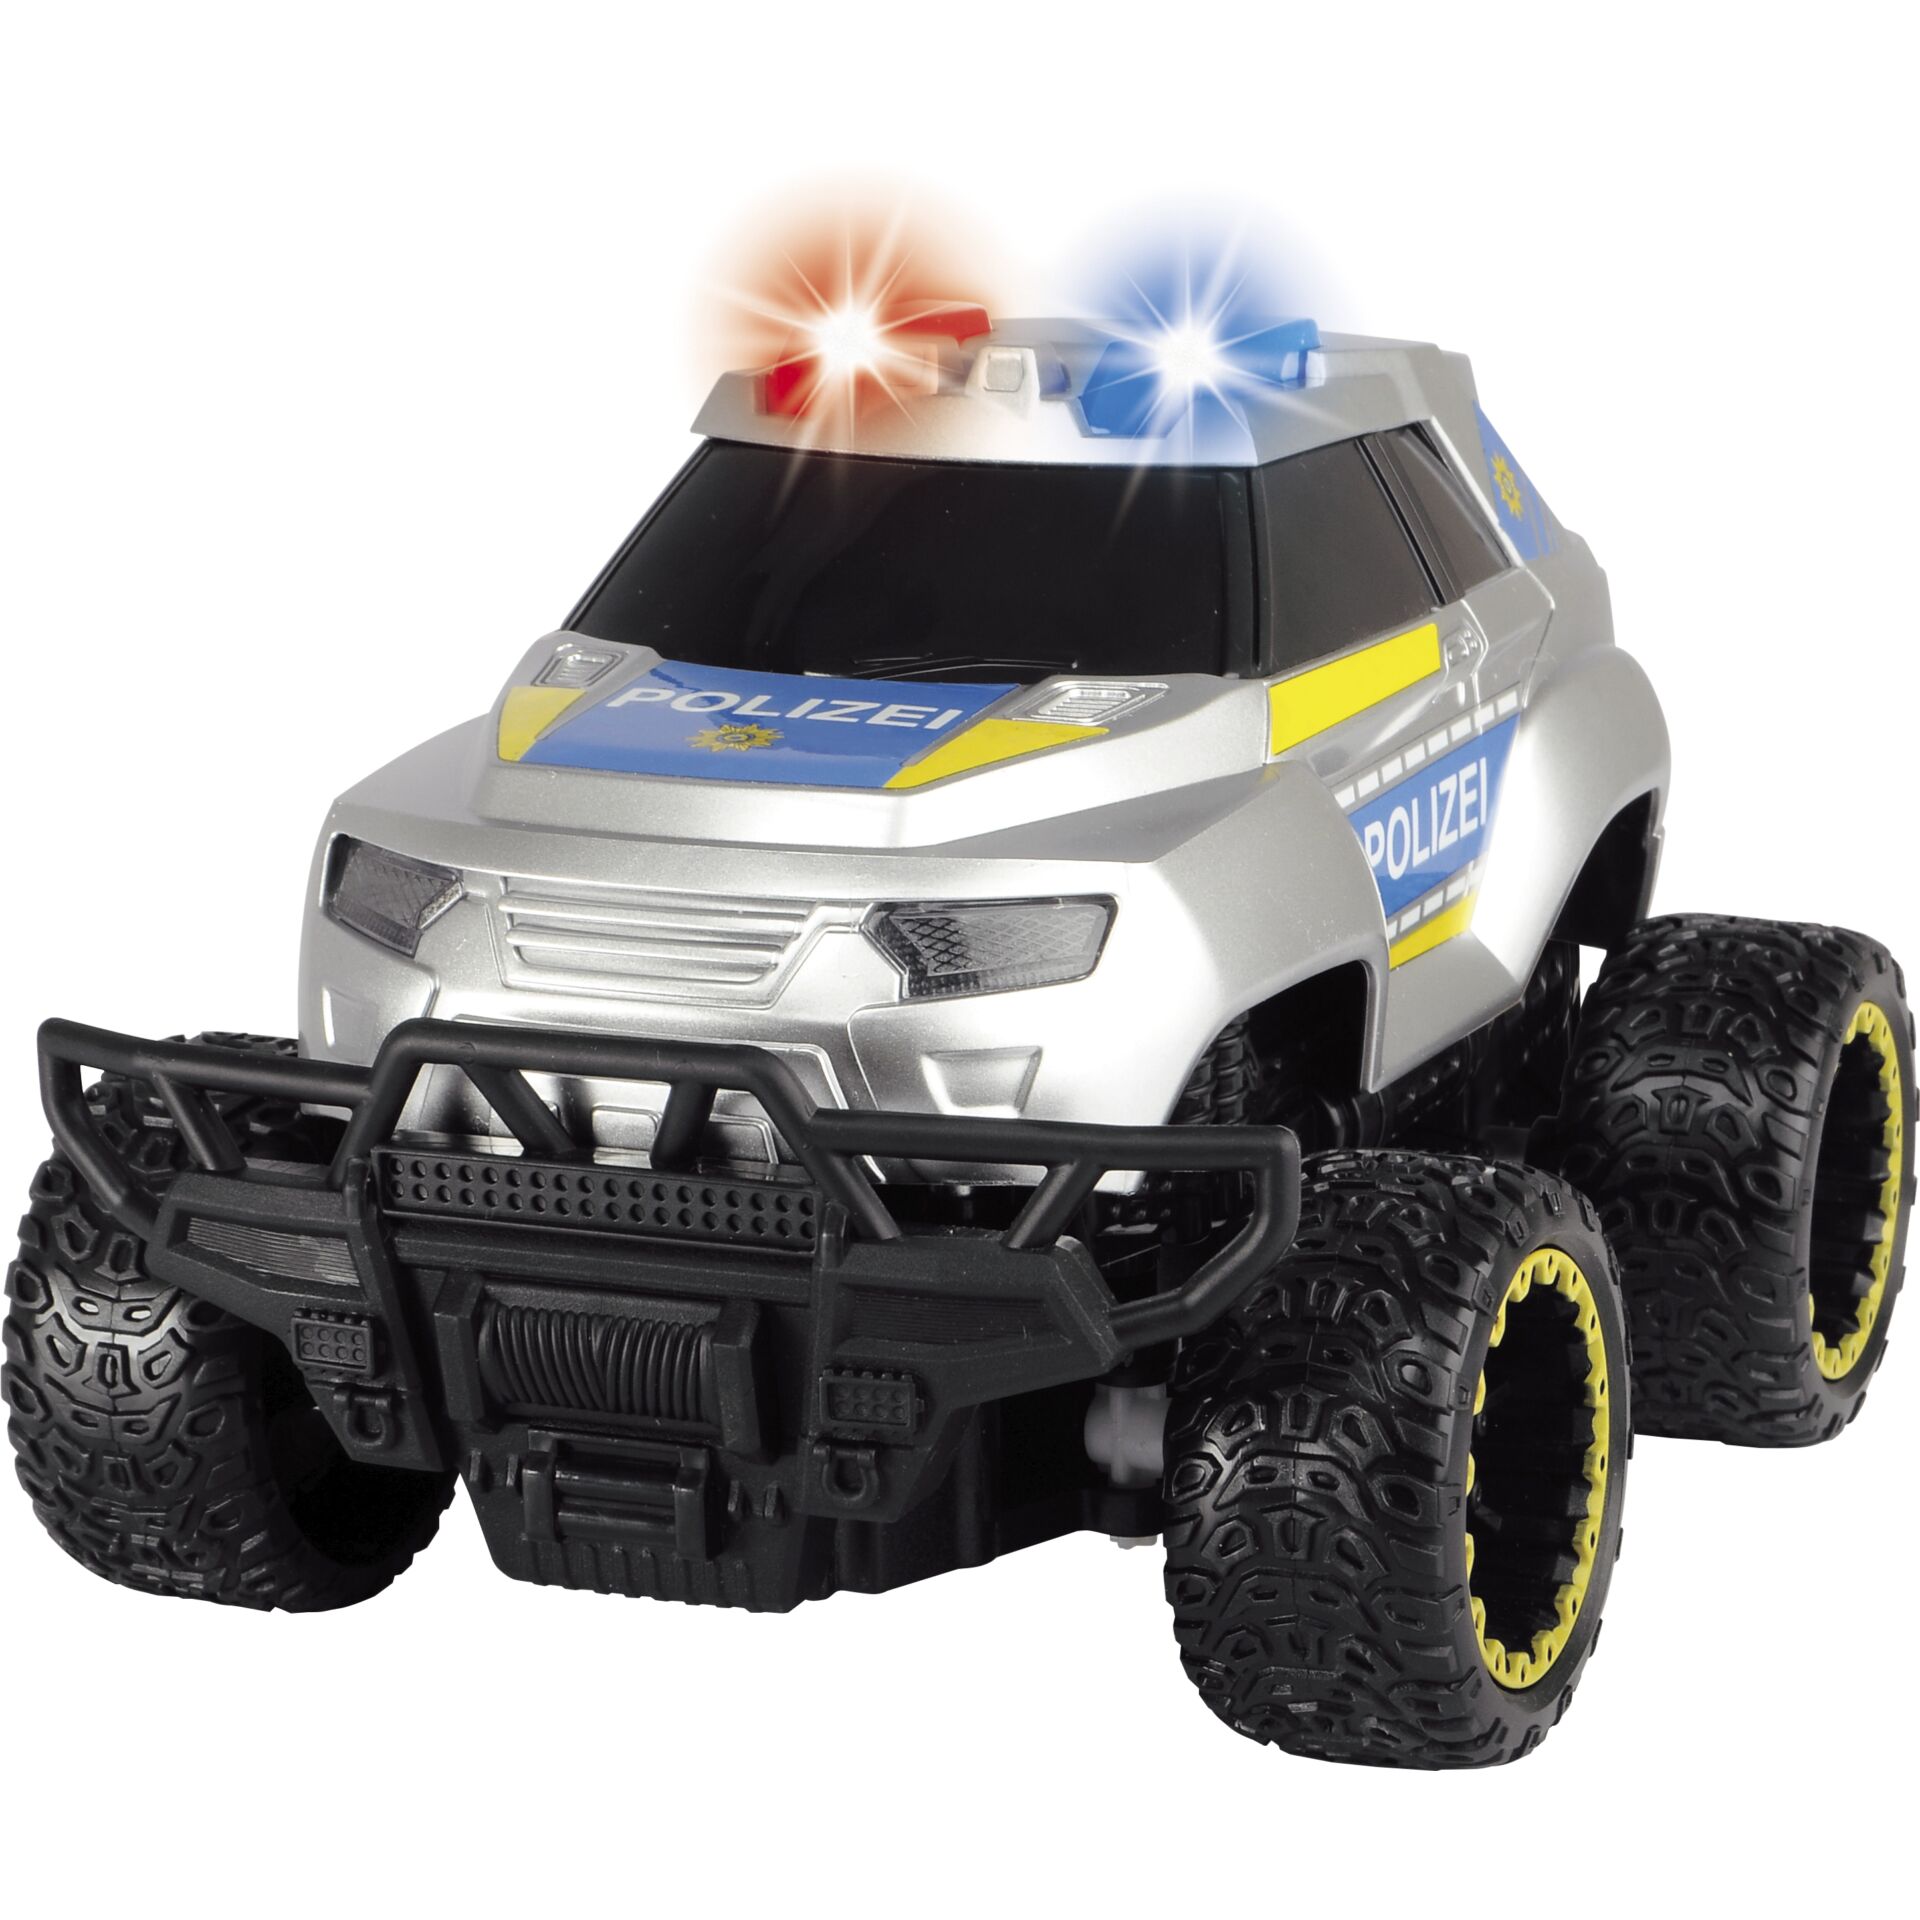 Dickie RC Police Offroader RTR 2,4 GHz, 1:24          201104000